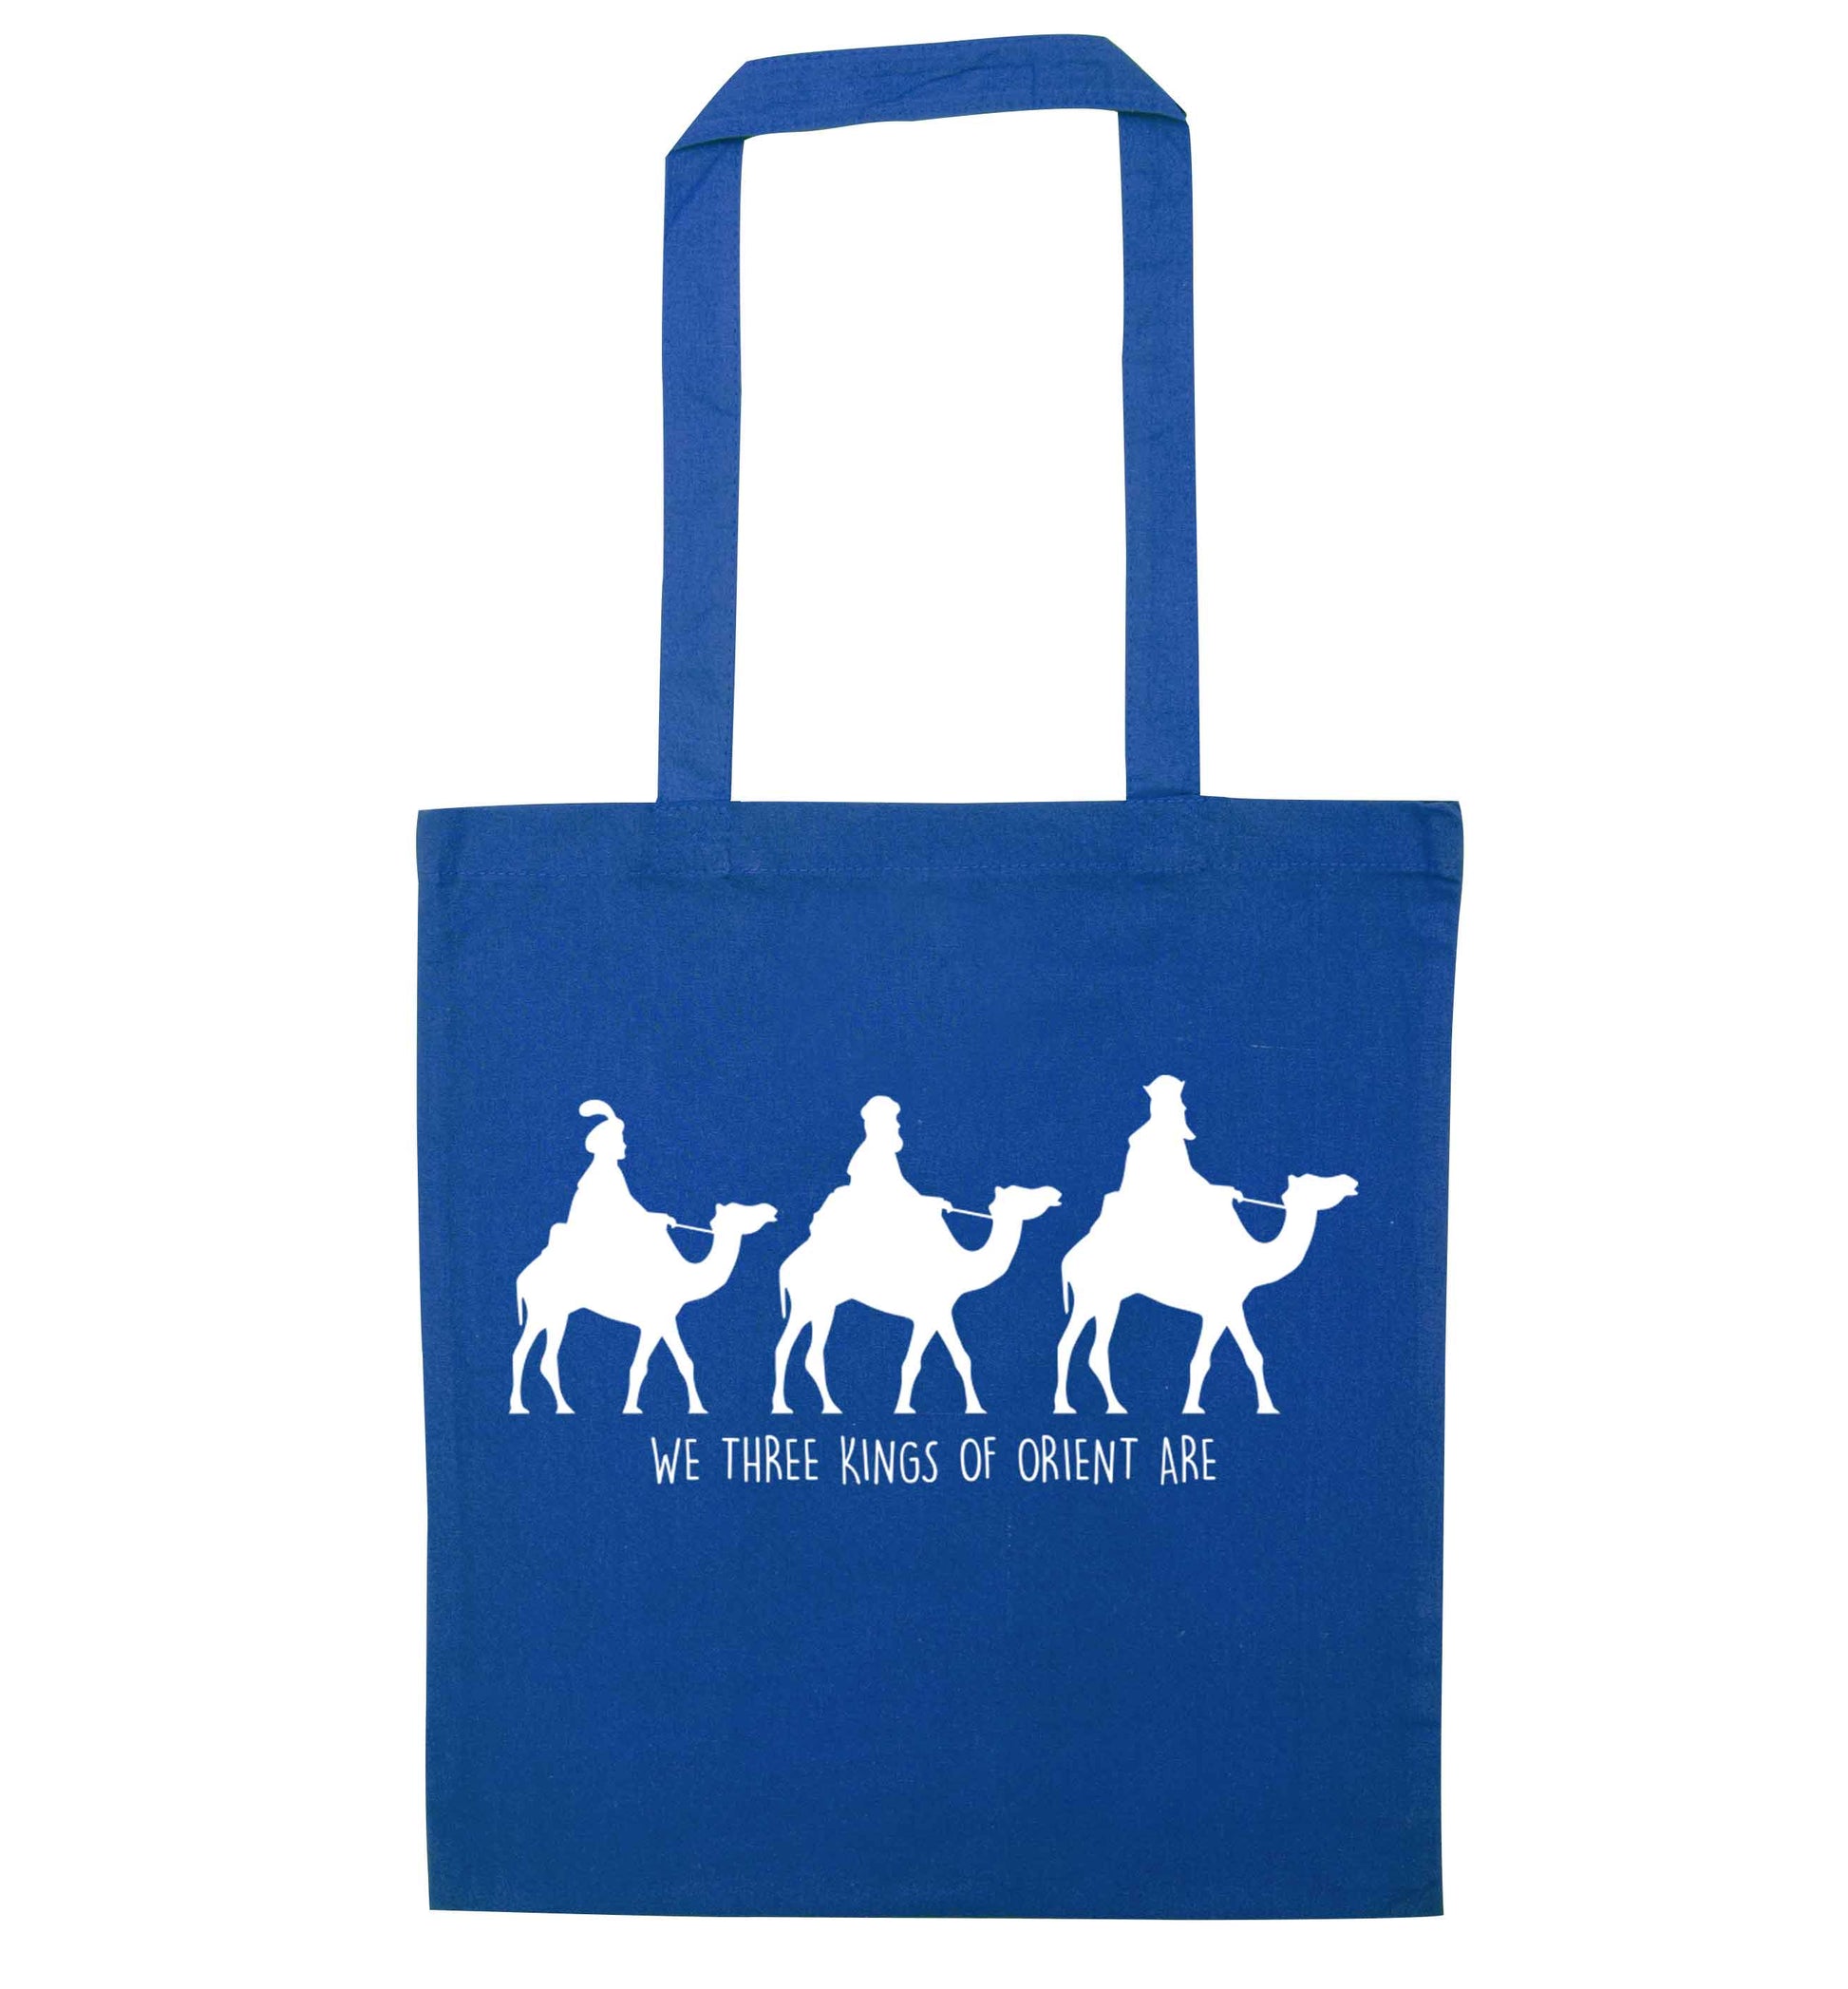 We three kings of orient are blue tote bag